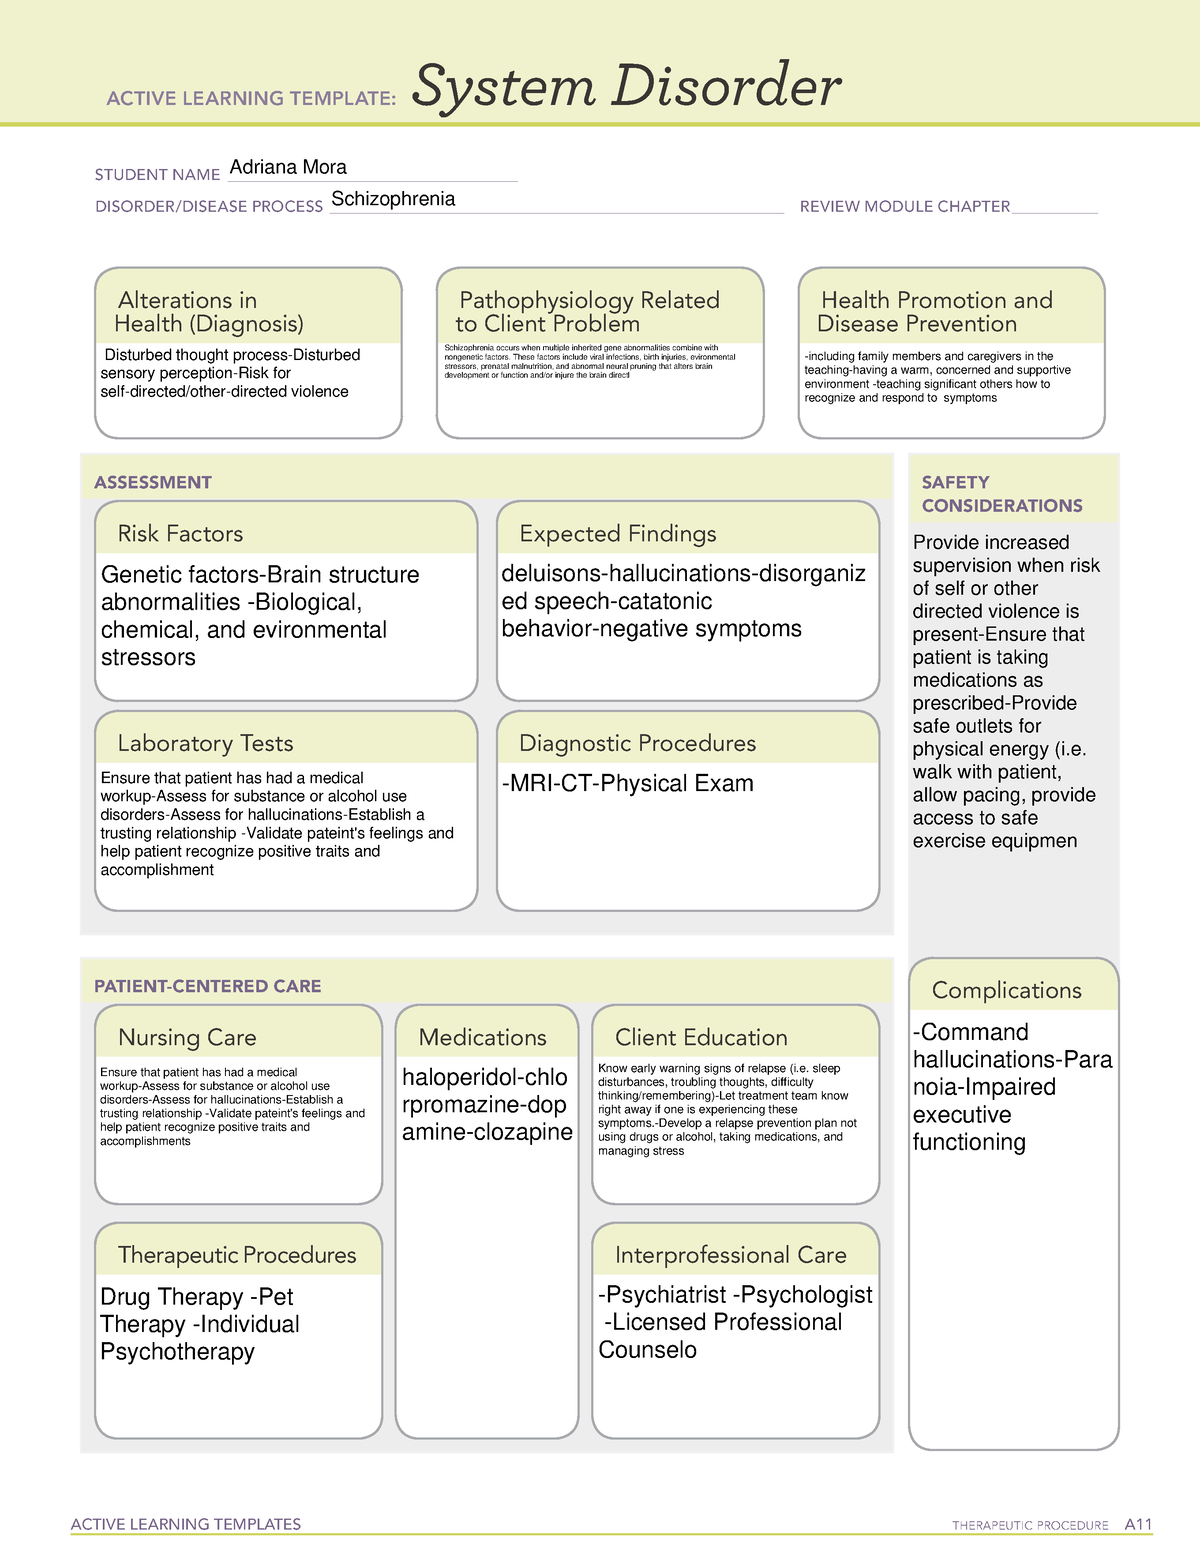 schizophrenia-sd-system-disorder-template-active-learning-templates